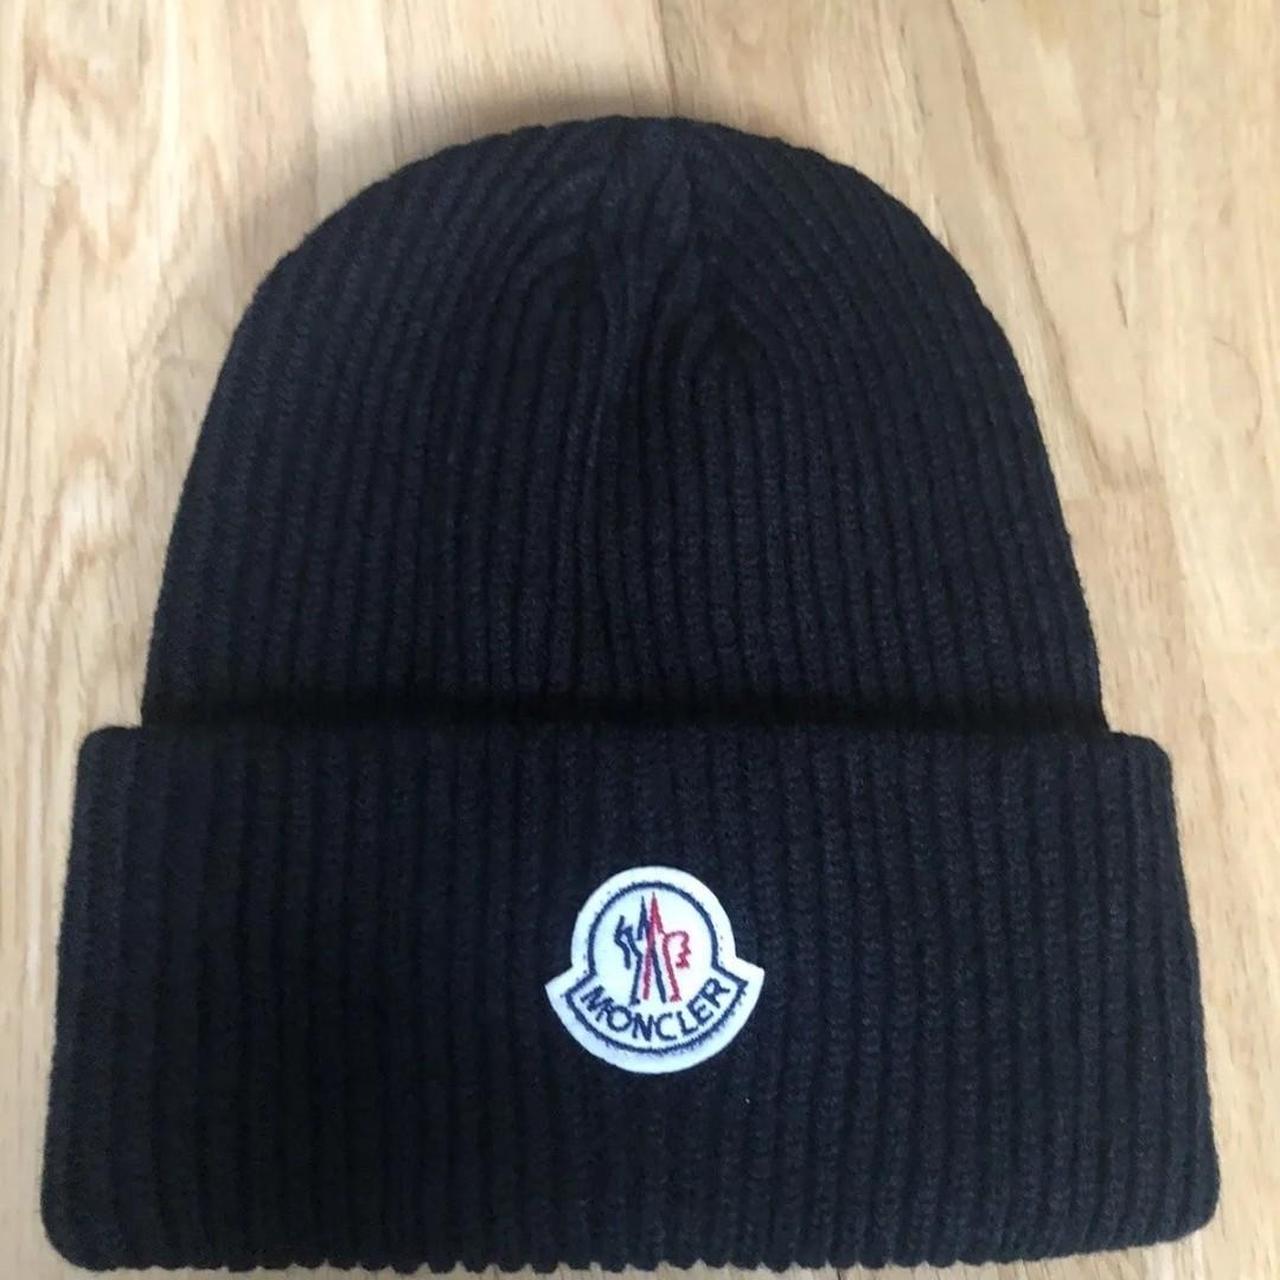 Moncler beanie perfect condition I accept offers - Depop